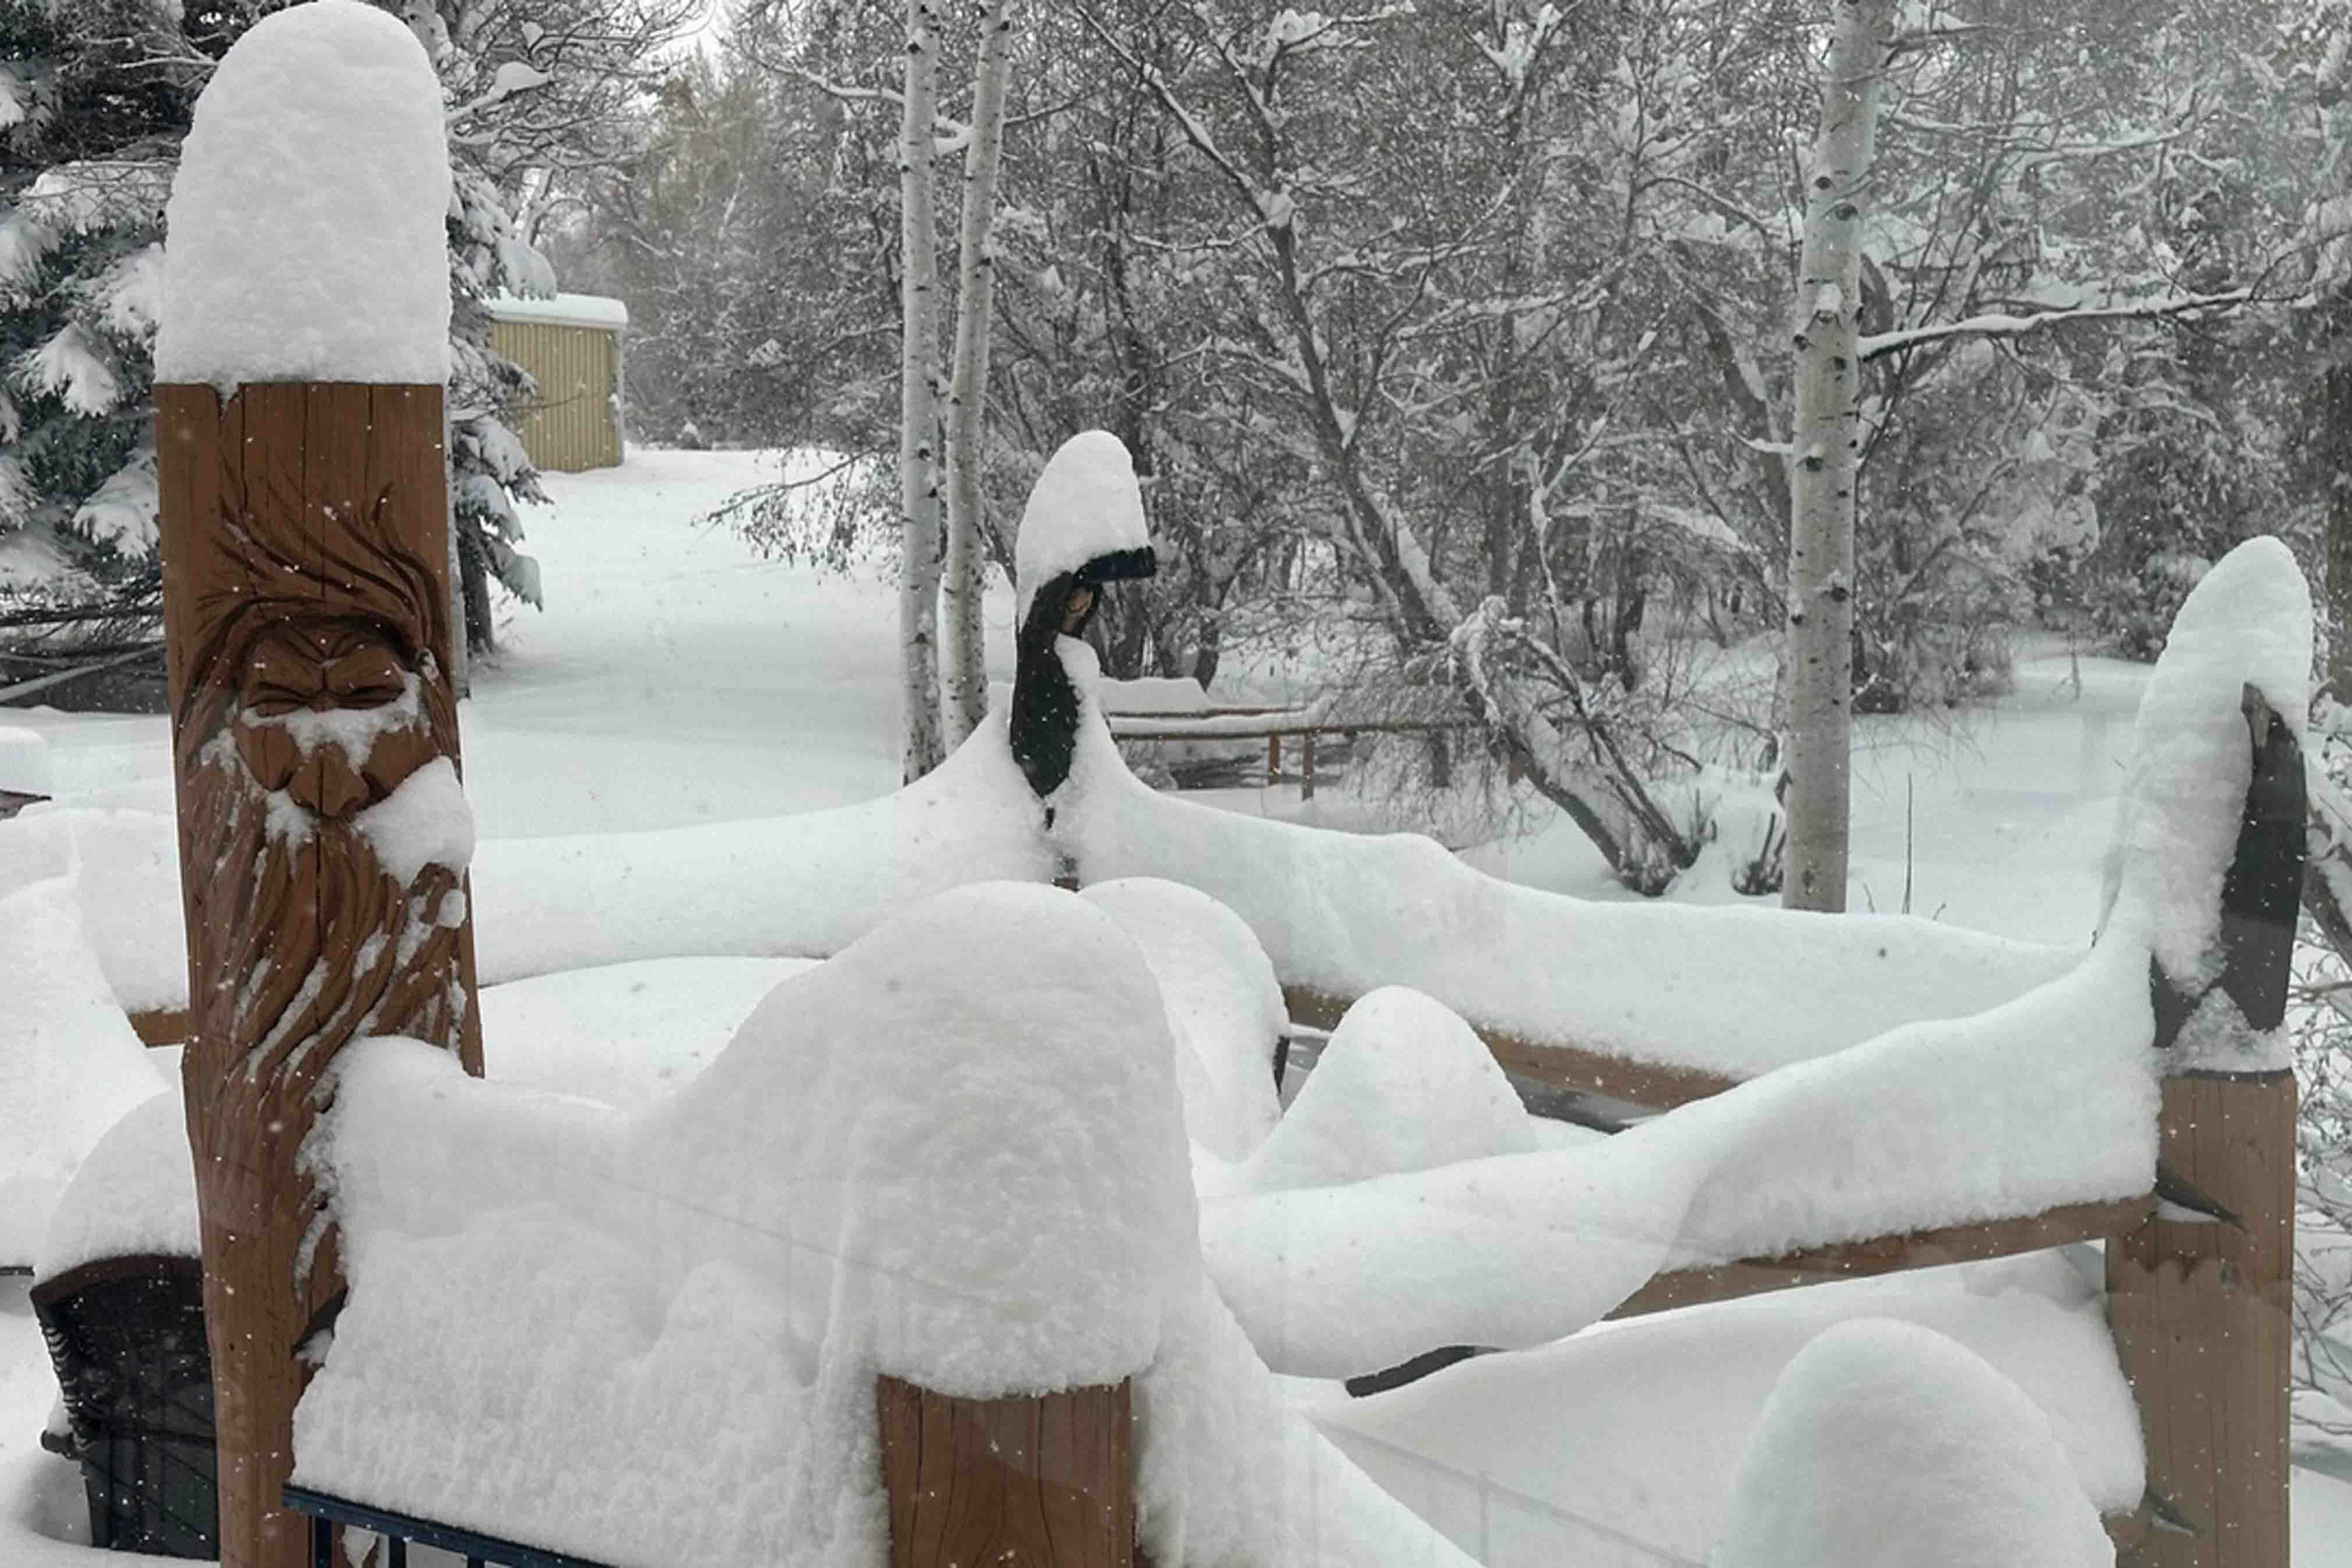 The wind does not blow much in Lander. Here is the snow piling up on the back deck at the Sniffin home.